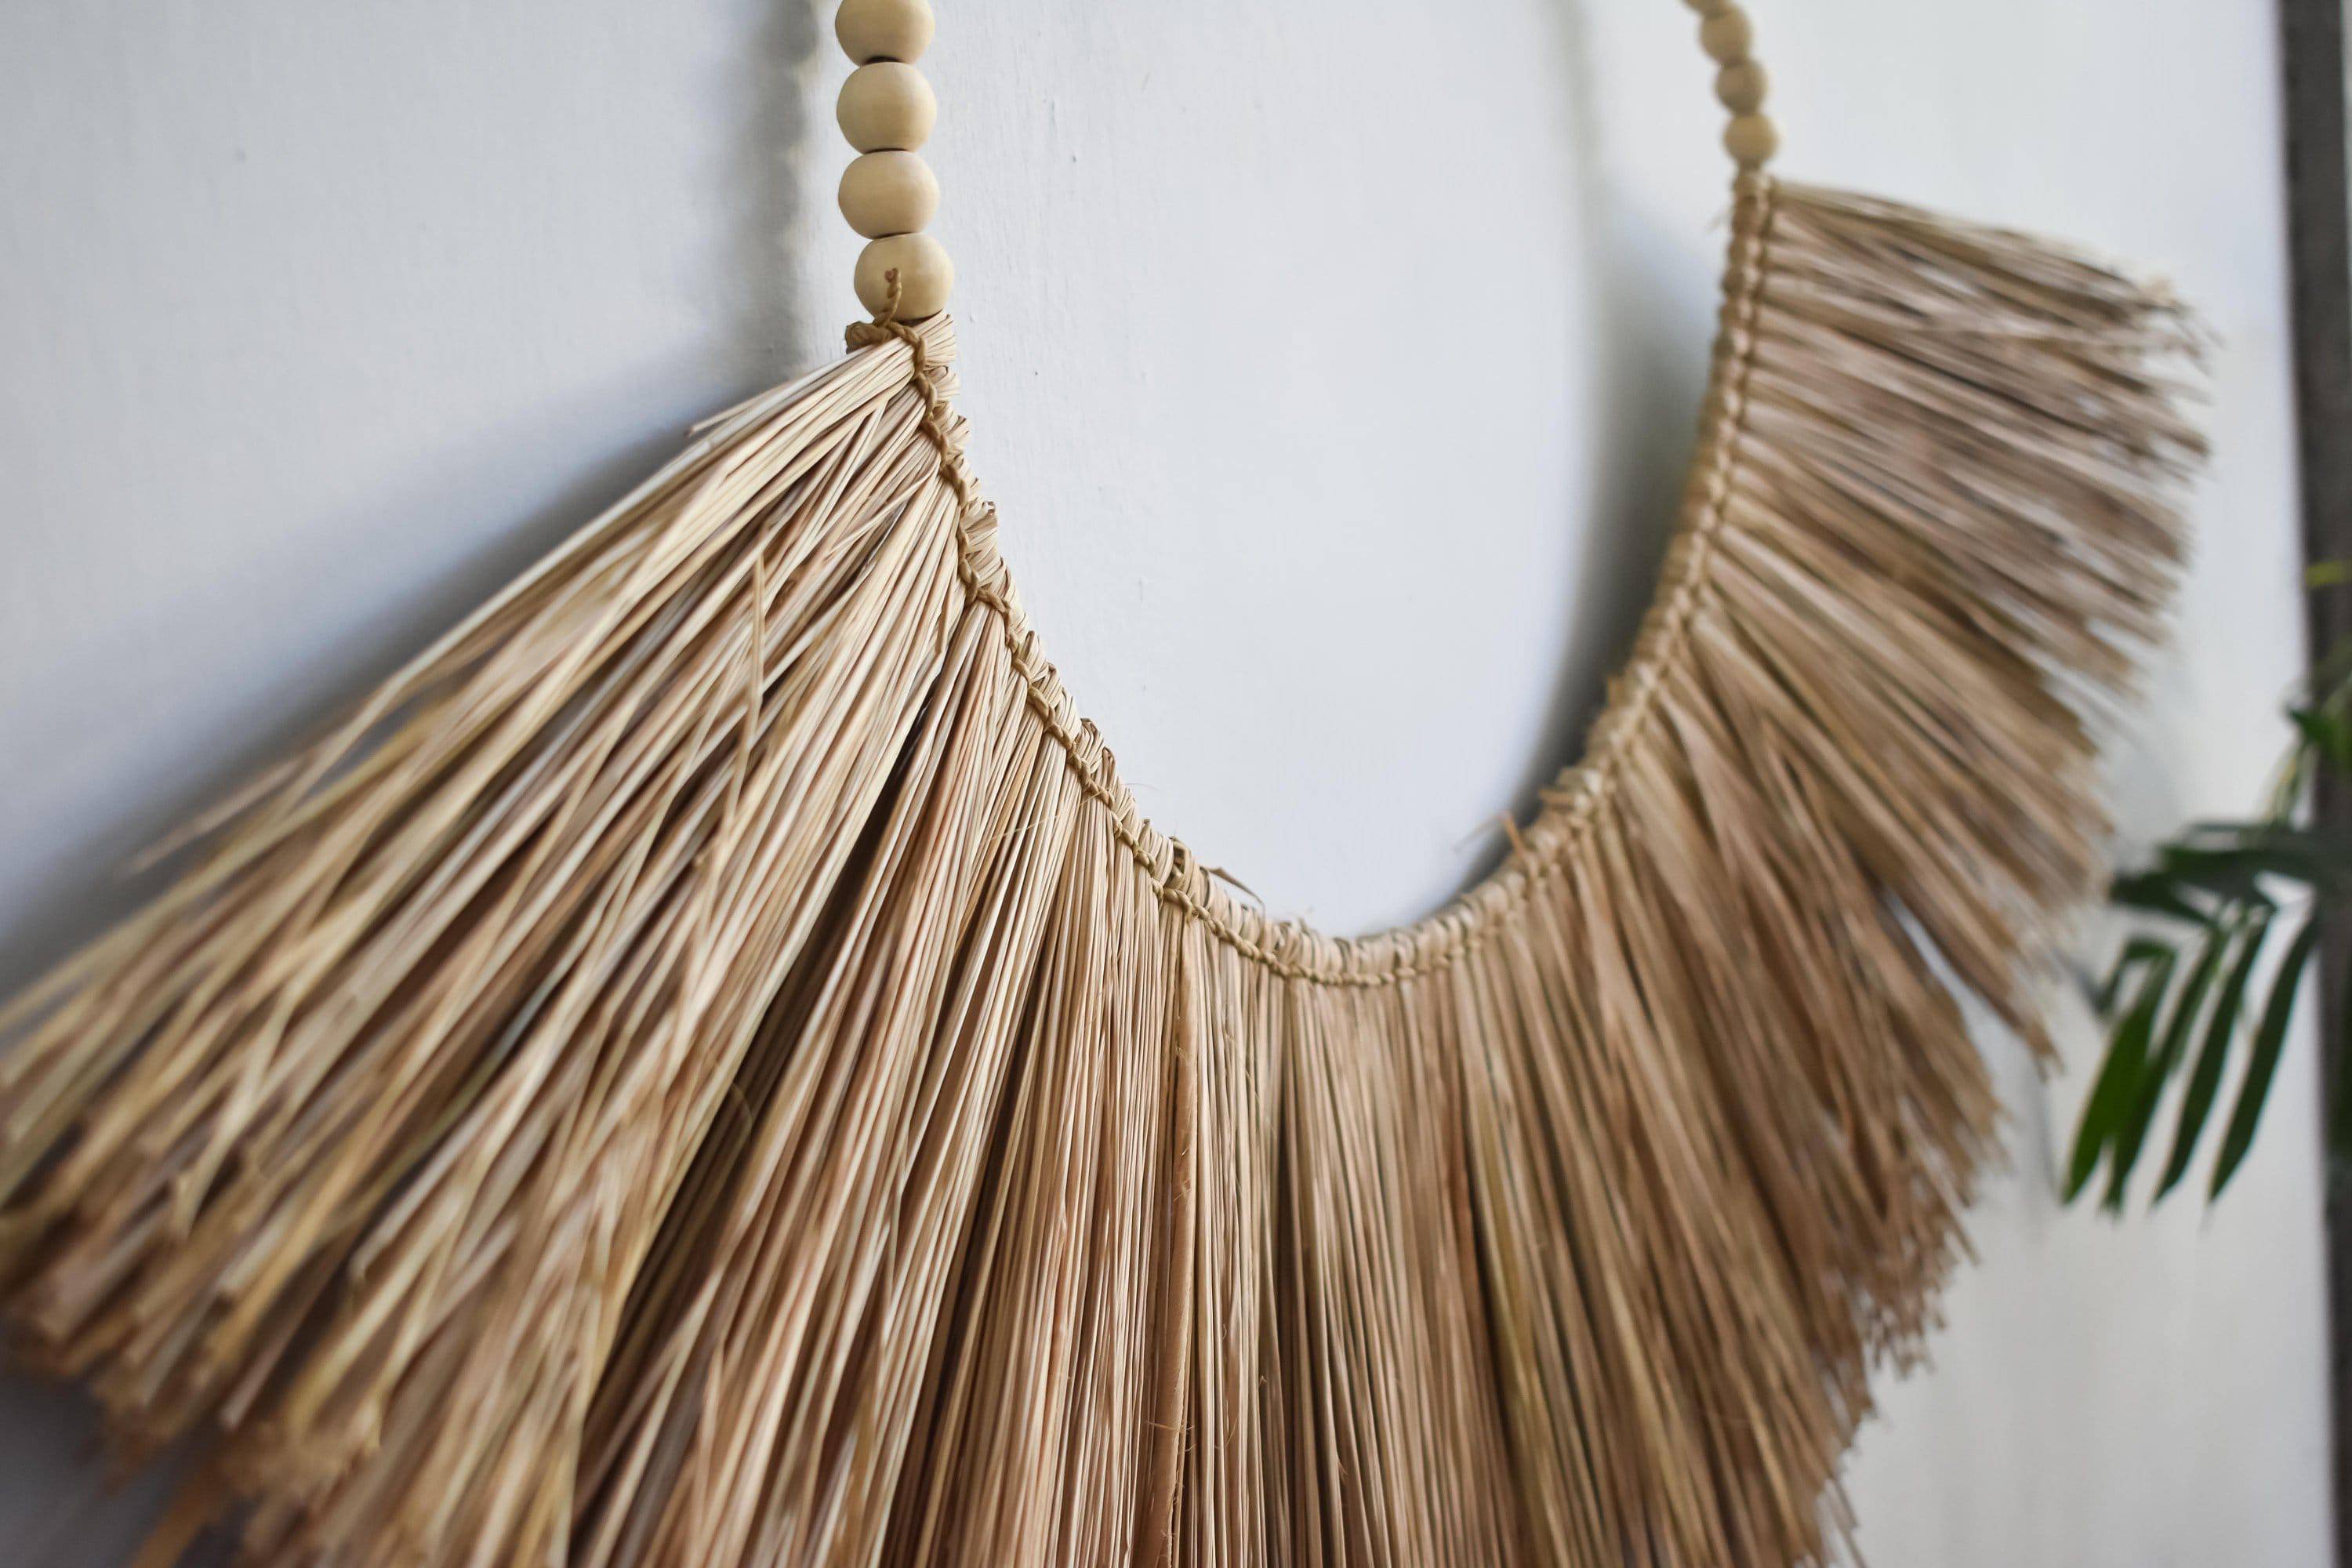 Raffia wall hanging with wooden beads - Joglo Living